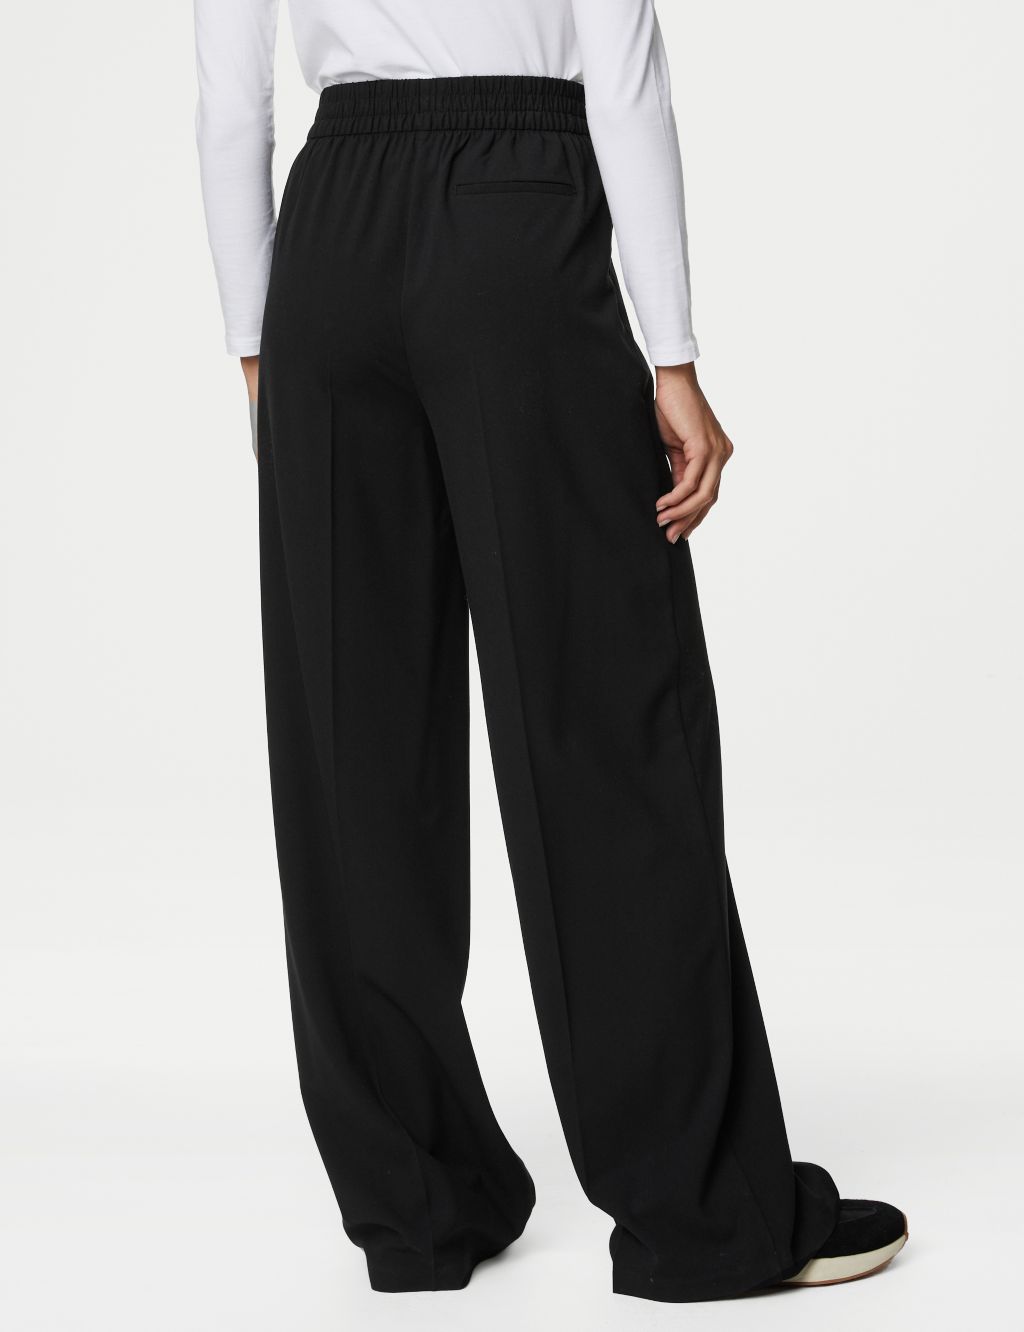 Wide Leg Trousers image 3